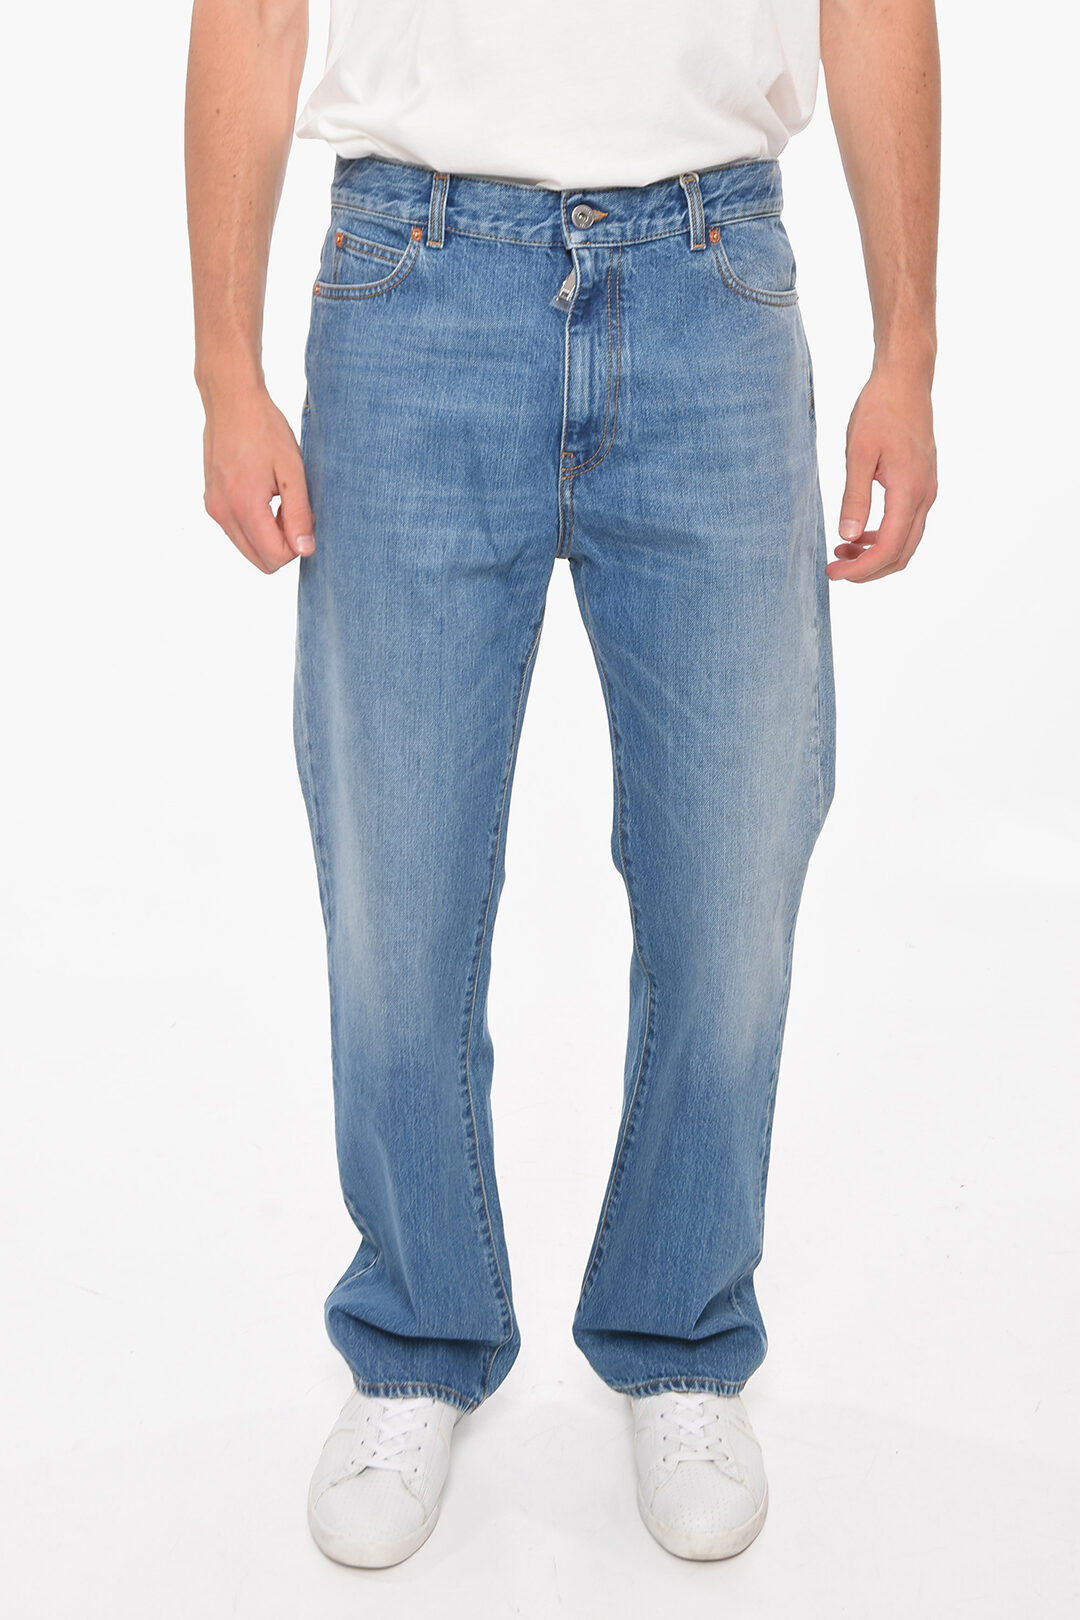 Valentino ARCHIVE Printed Regular Fit Jeans men - Glamood Outlet